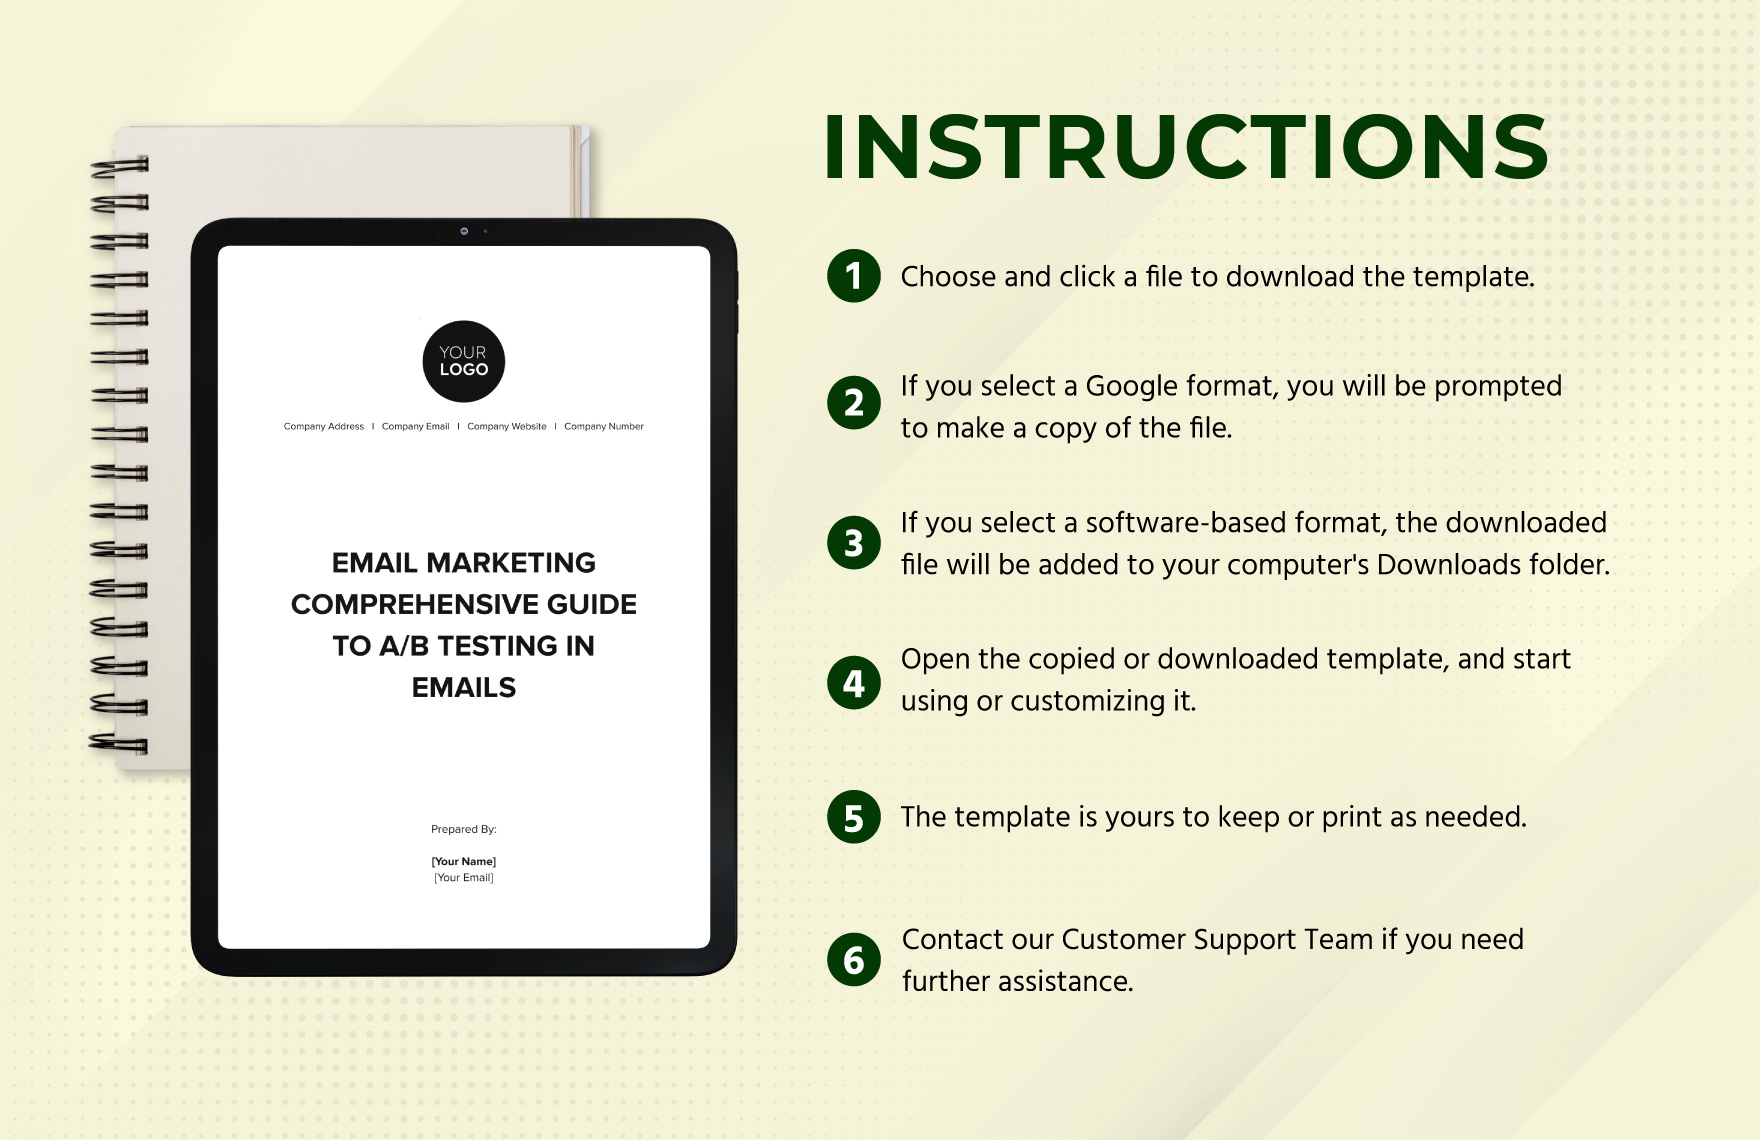 Email Marketing Comprehensive Guide to A/B Testing in Emails Template